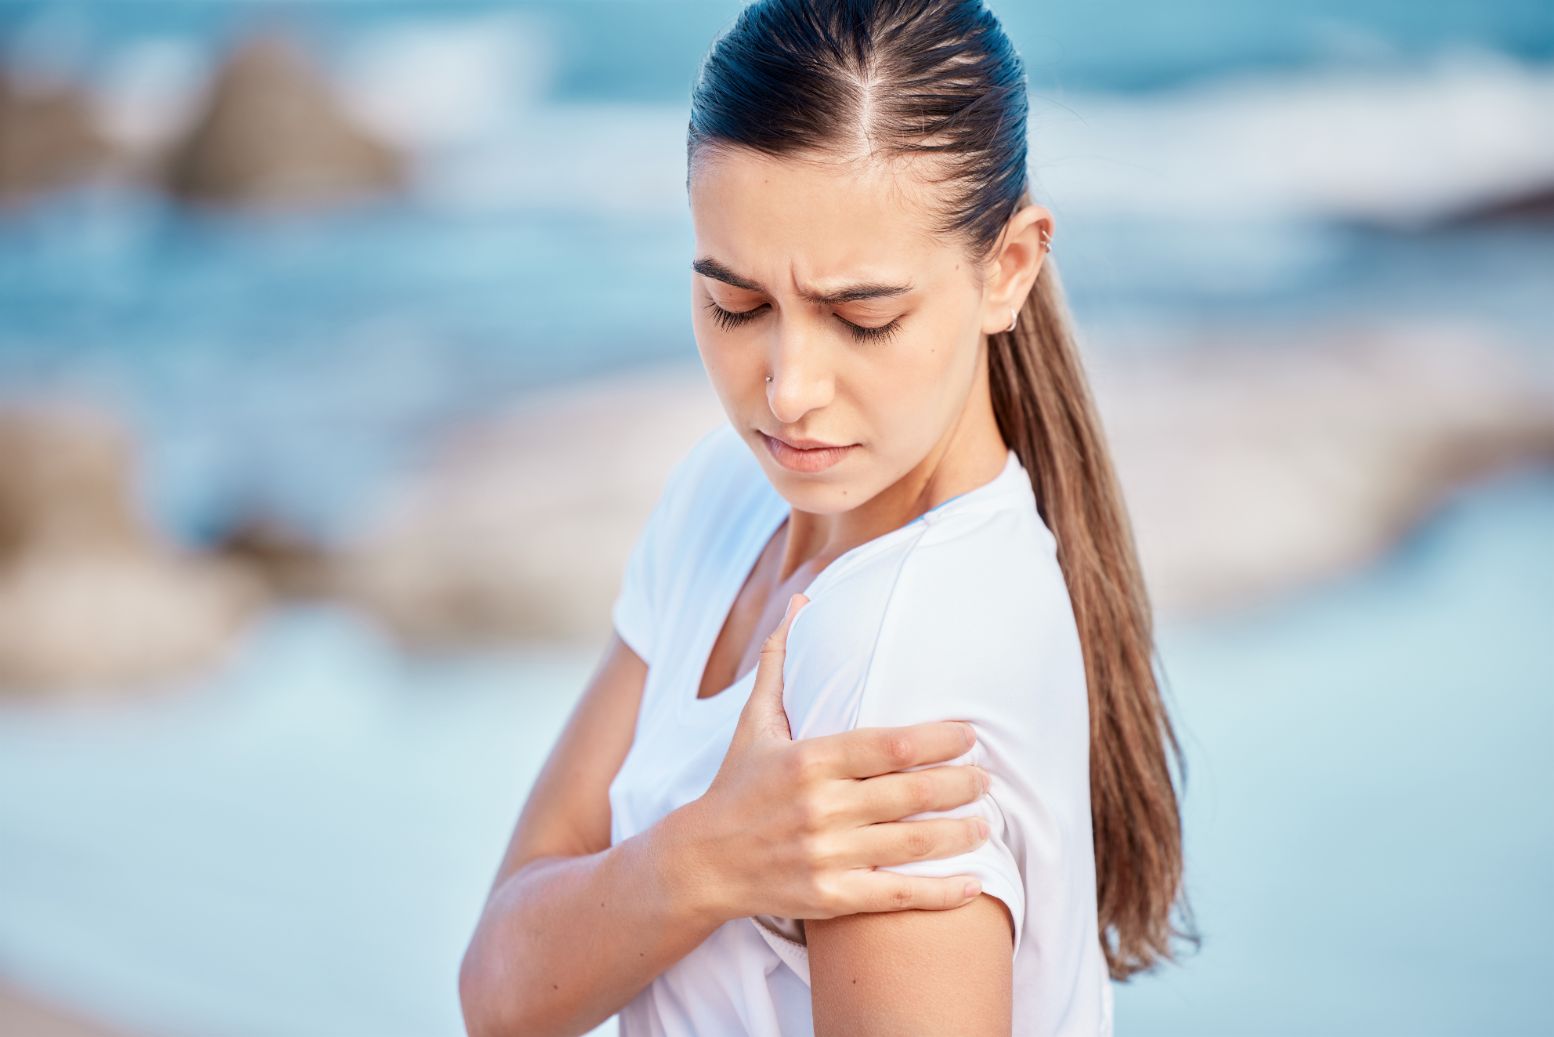 Common Factors Behind Arm Pain Without Injury